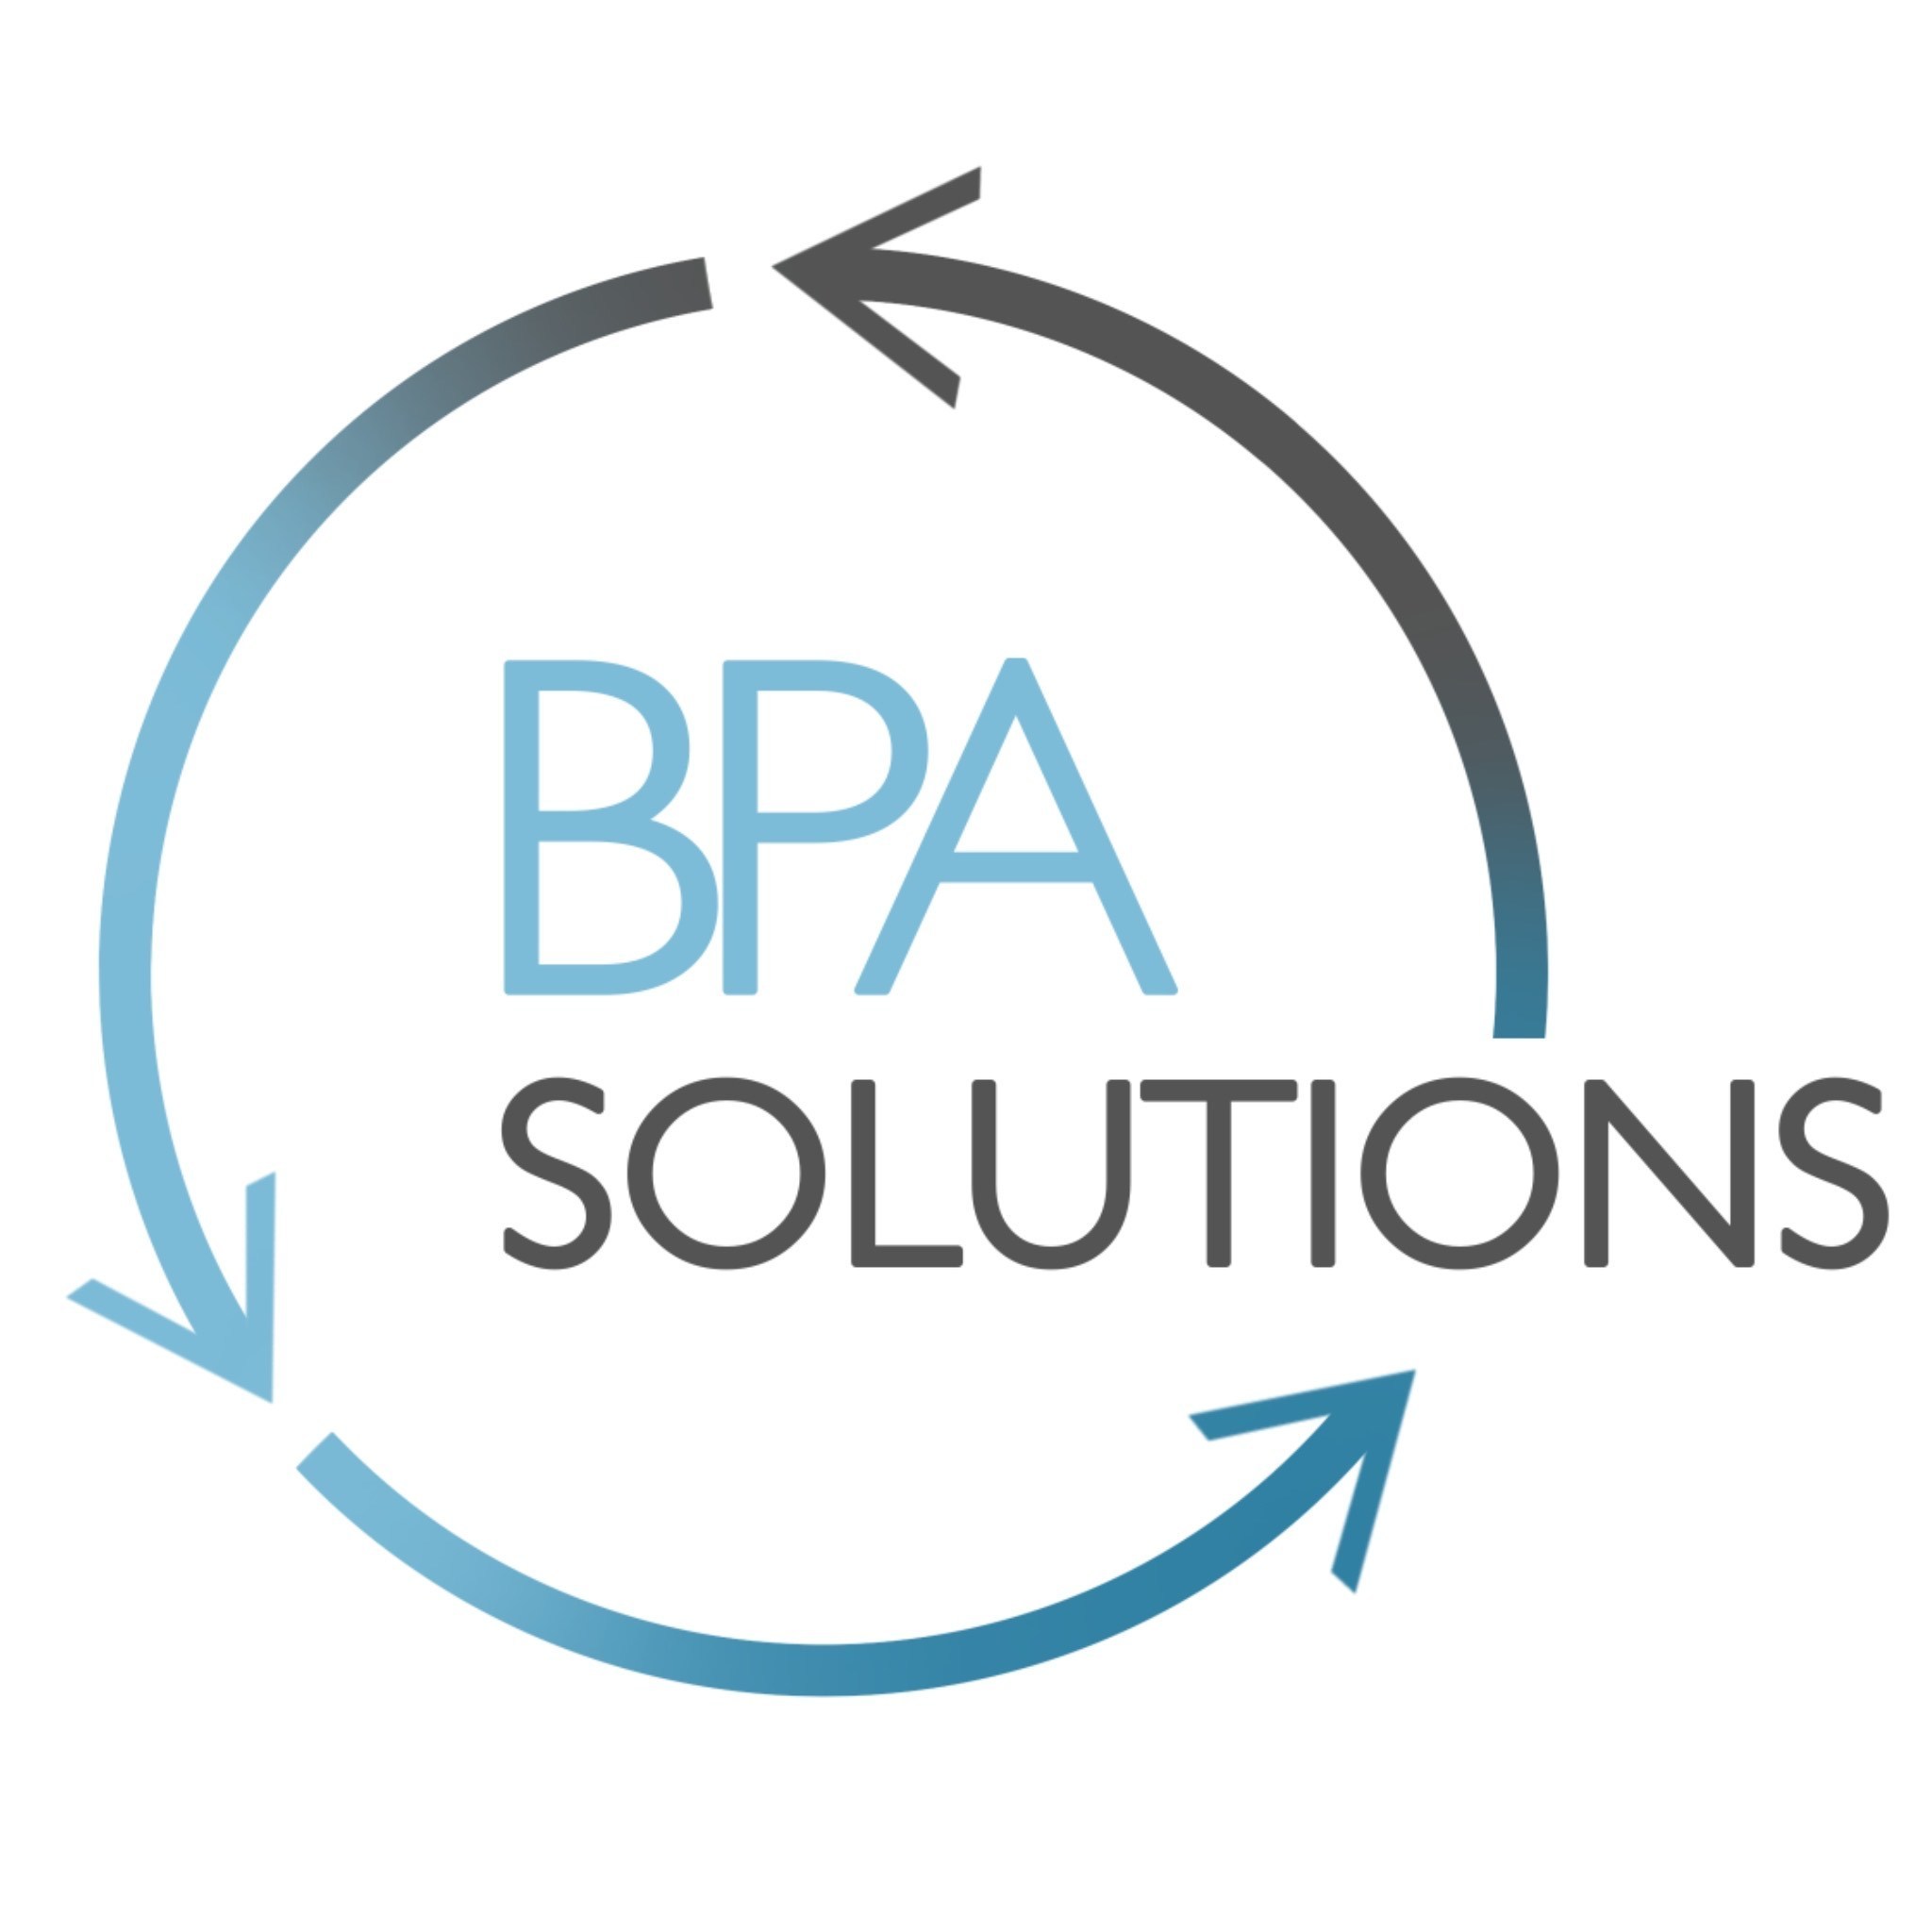 SinglePoint Subsidiary, BPA Solutions, Announces Master Distributor